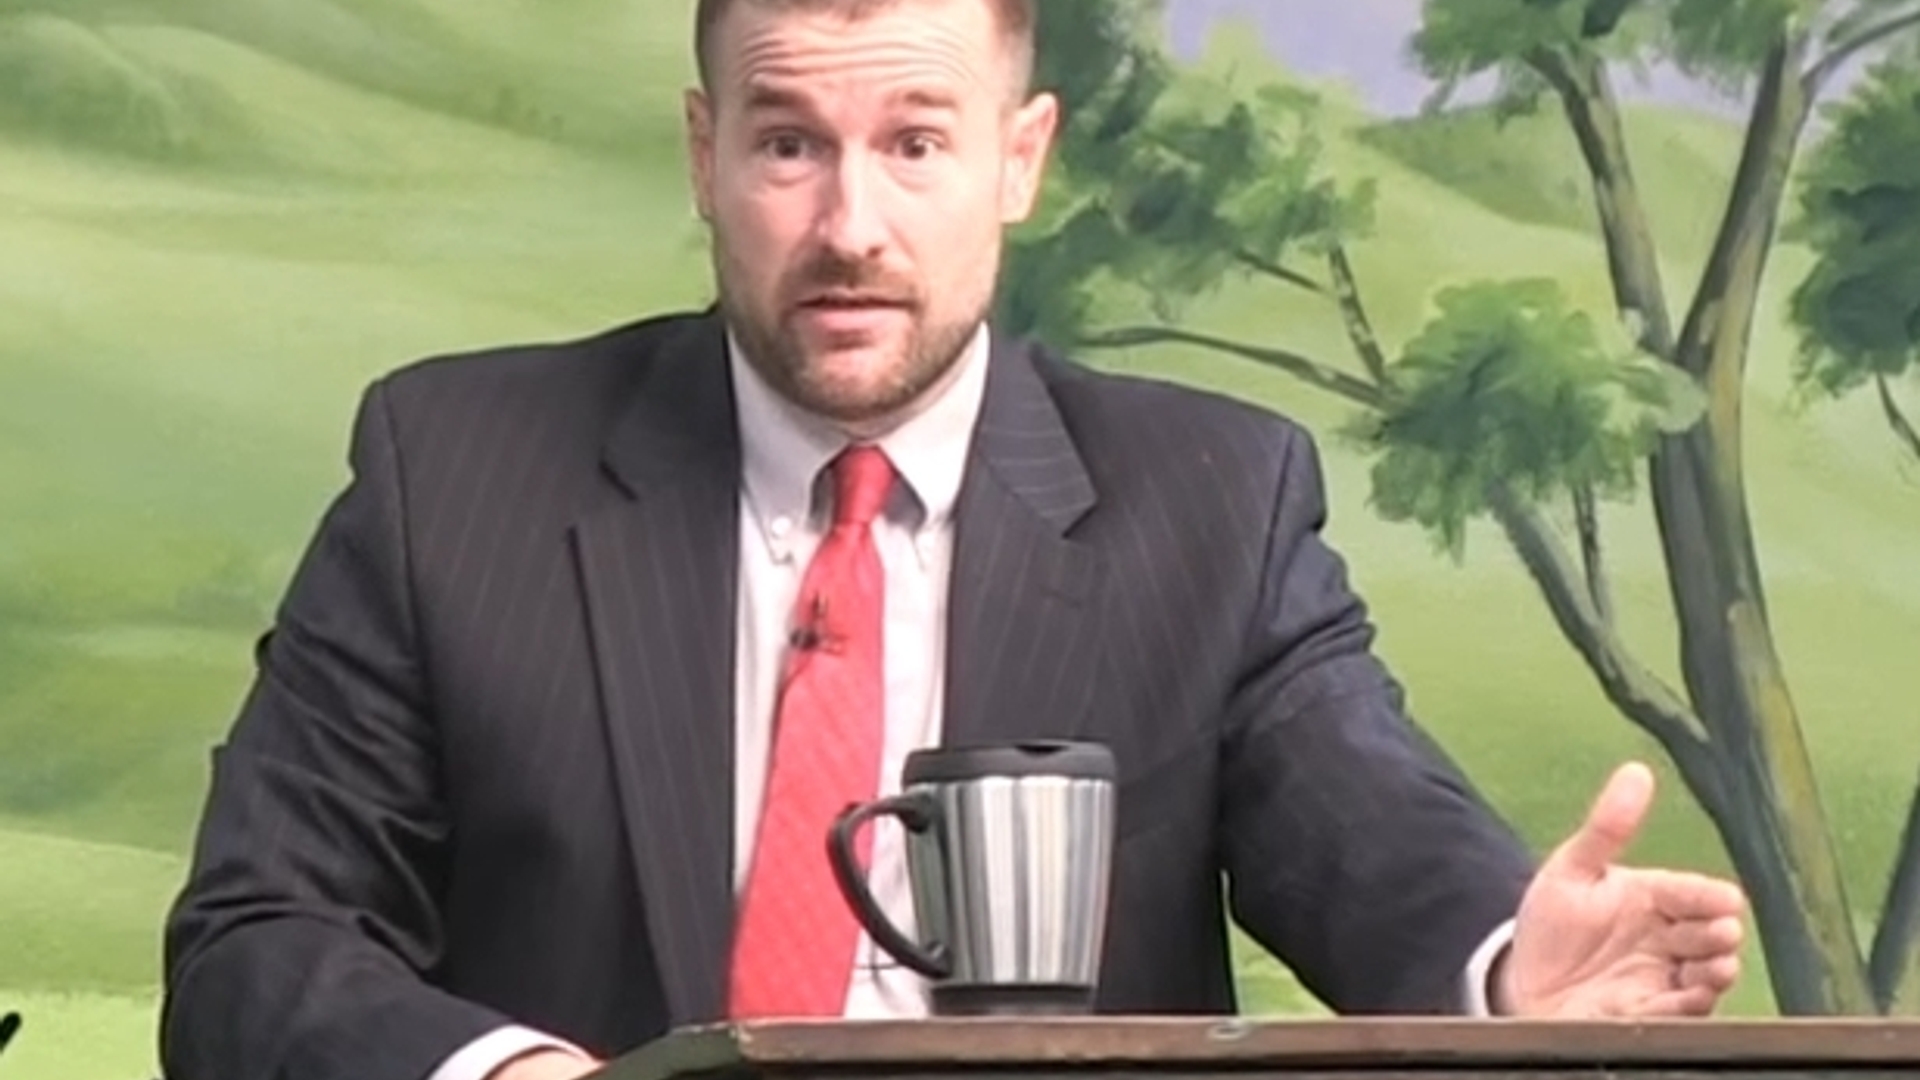 Steven_L_Anderson_preaching_at_his_church_in_April_2017_crop